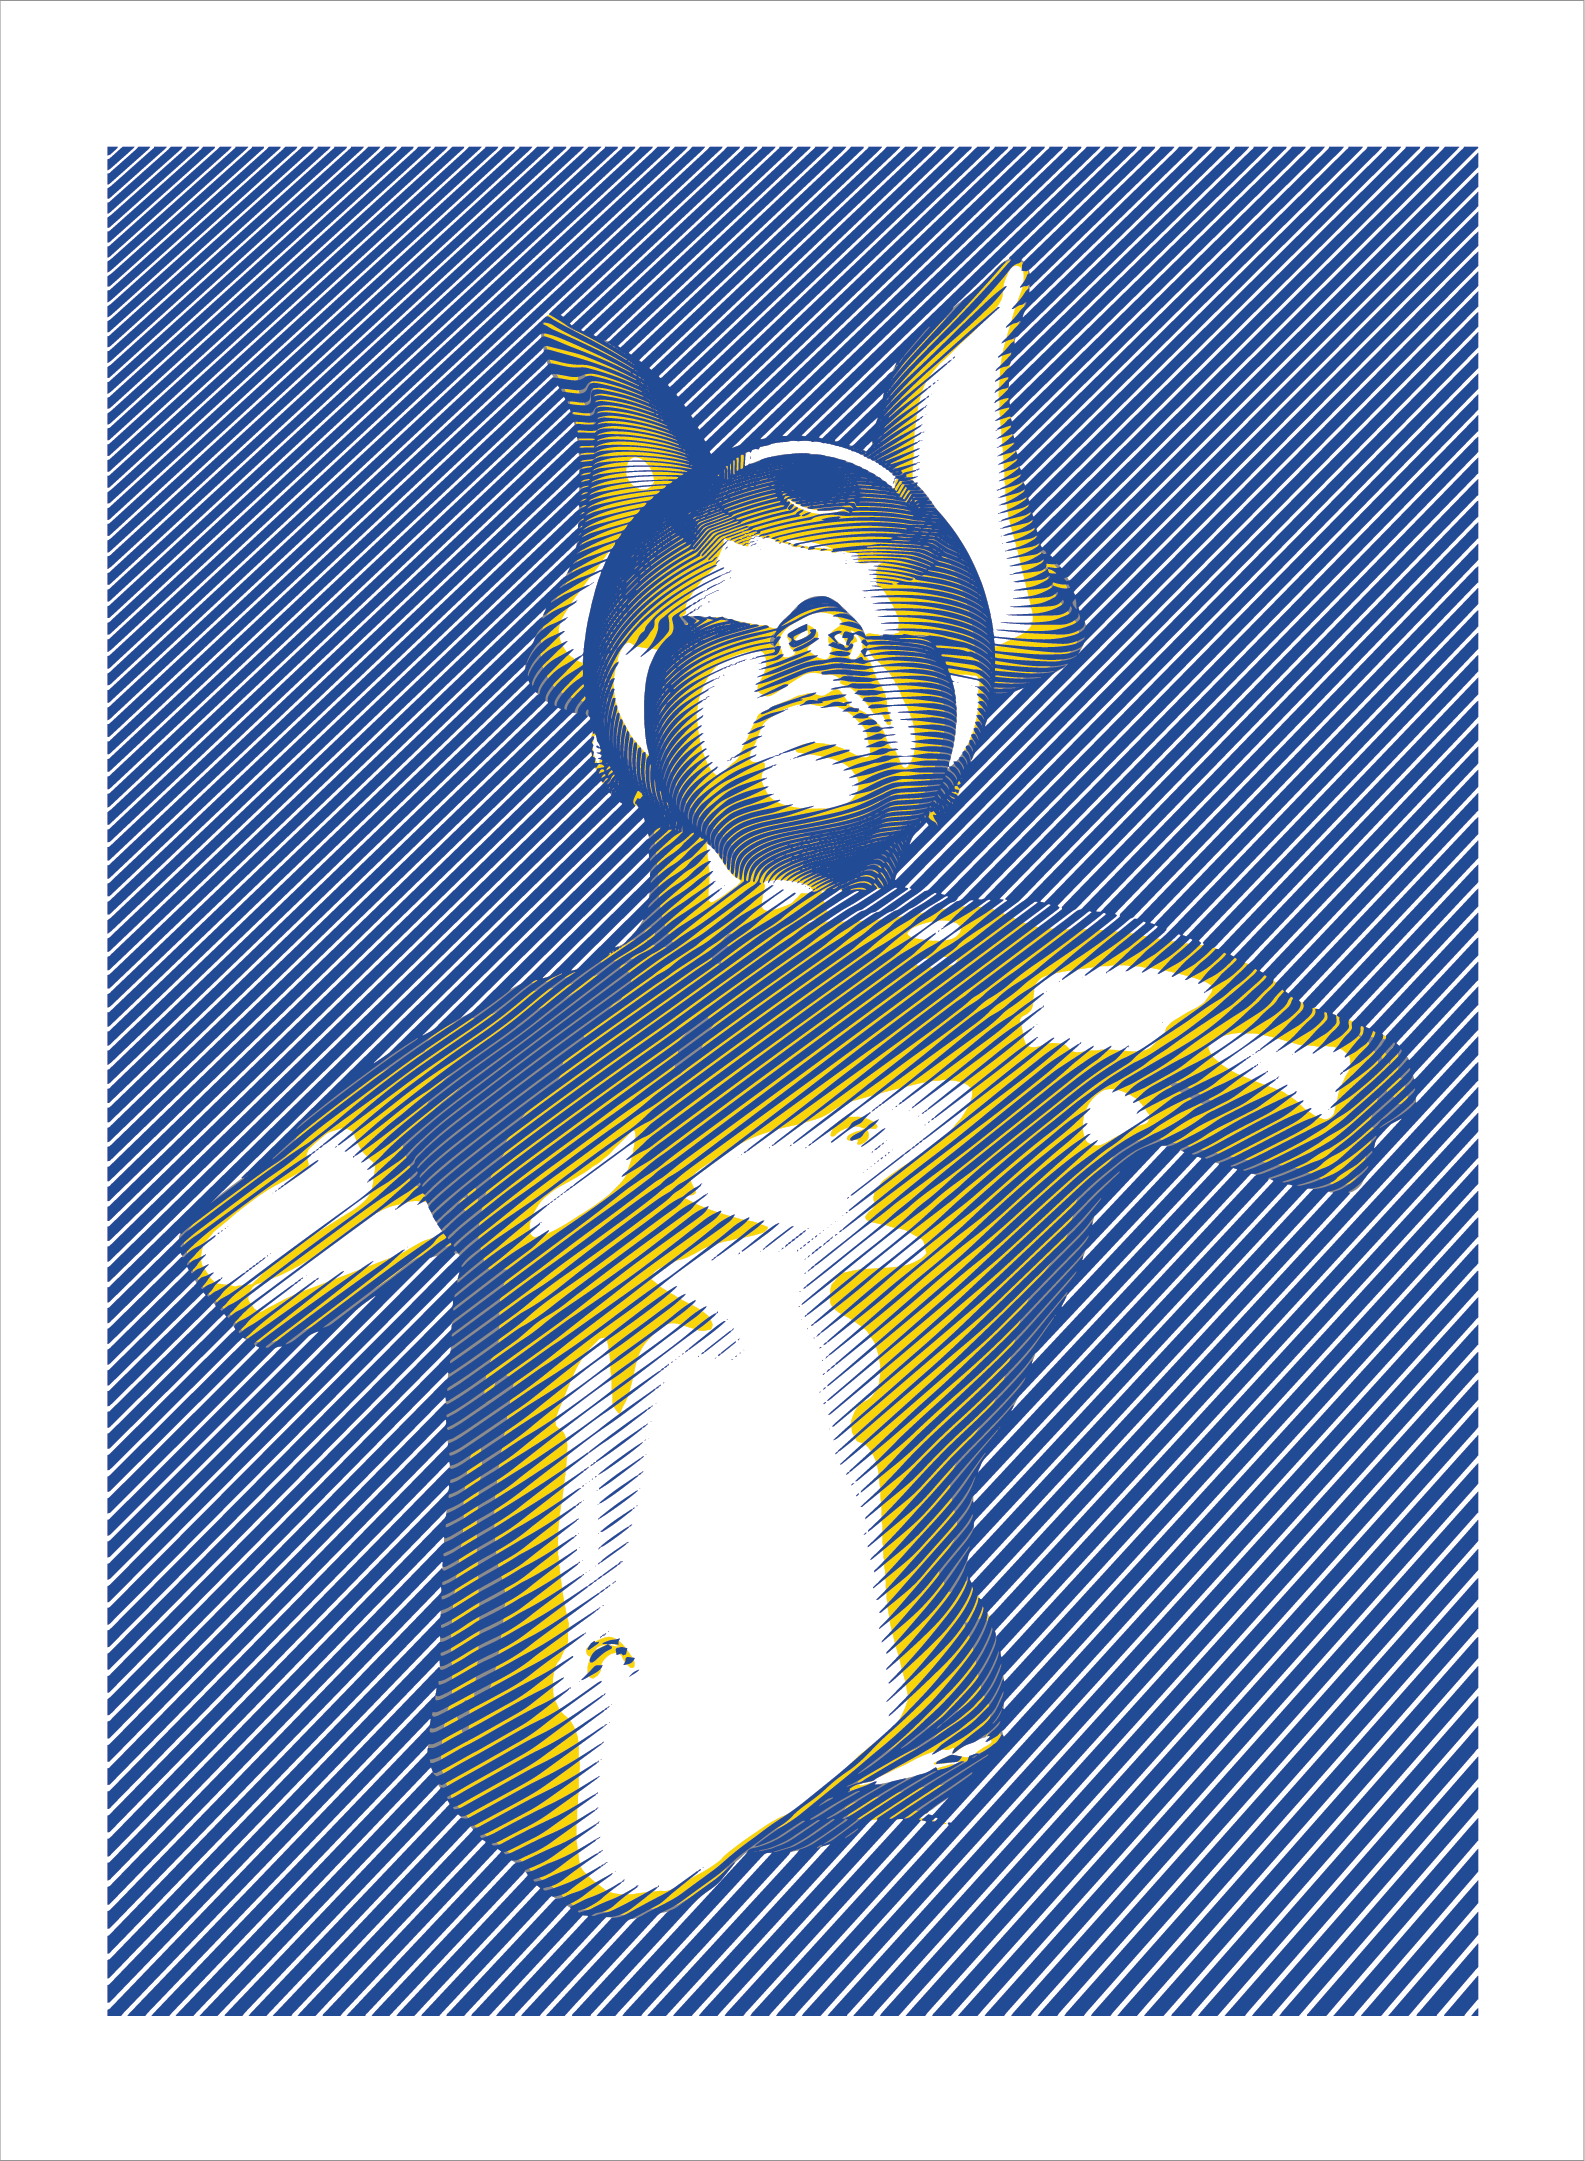 Cyclops In Blue, Gray and Yellow
By Elliott Earls
22 x 30 in.
3 Spot Color Hand Pulled Screenprint on American Masters 250gsm. 100% Cotton Paper. Deckle Edge.
Signed and Numbered,
Edition of 12.
Released October 3, 2016.